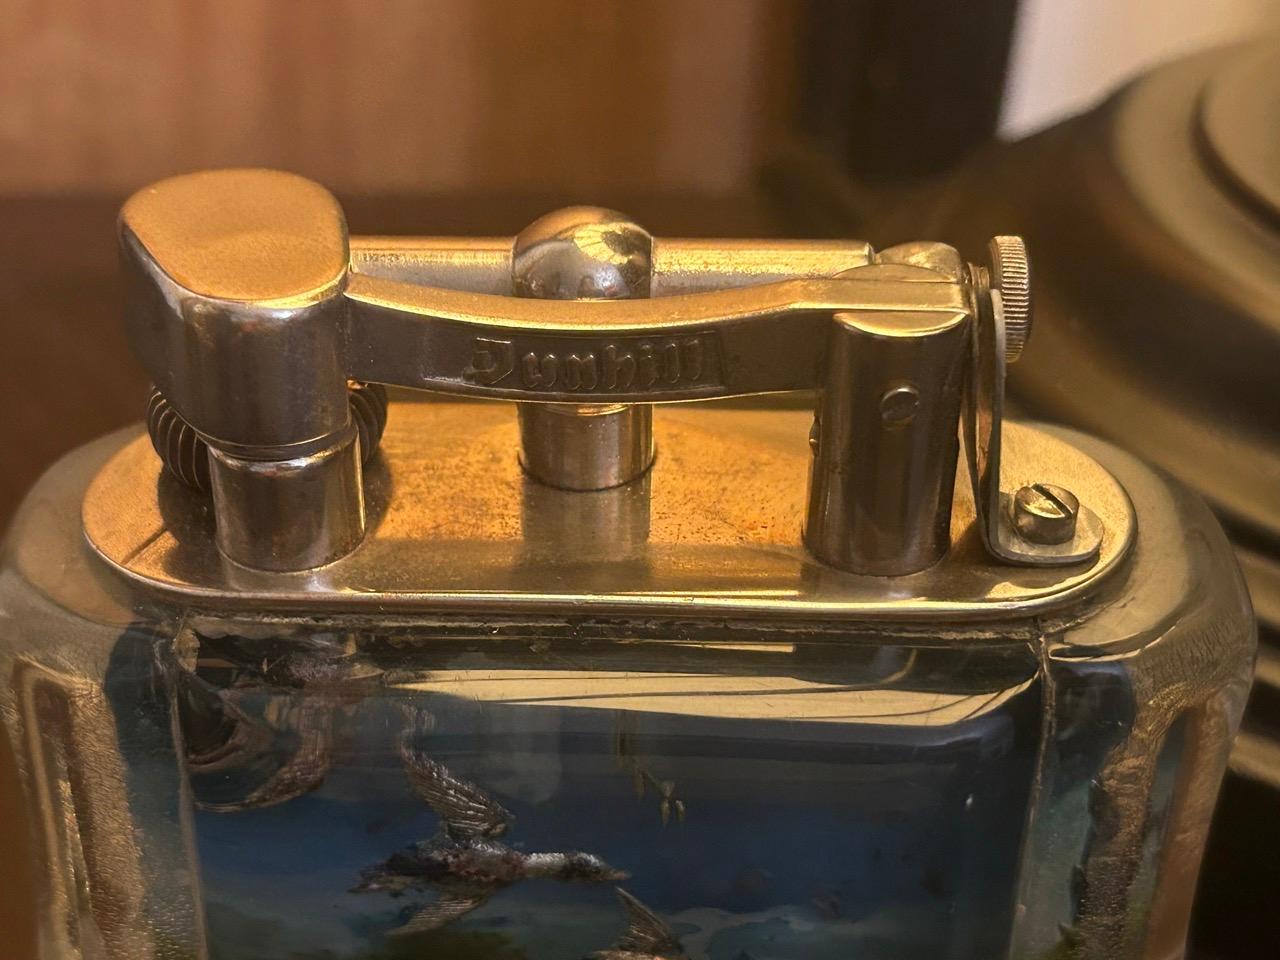 English Extremely Rare 1950s Dunhill Aviary, Non Aquarium, Half-Giant Lighter  For Sale